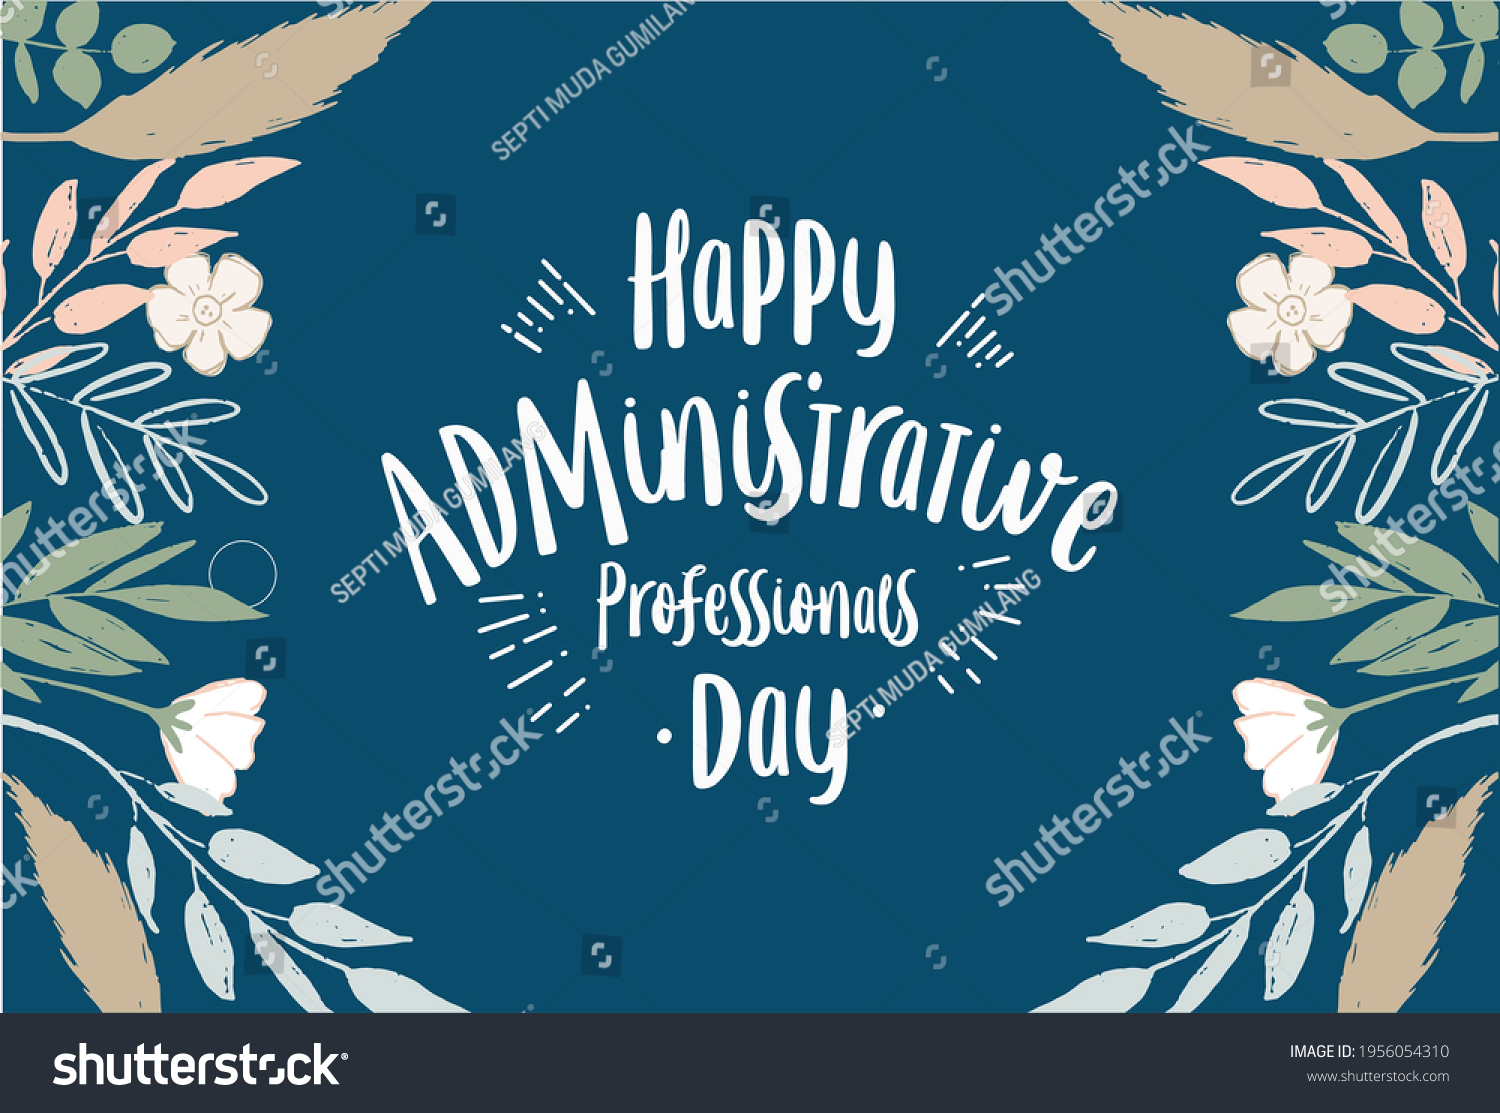 Administrative Professionals Day, Secretaries Day or Admin Day. Holiday concept. Template for background, banner, card, poster, t-shirt with text inscription #1956054310